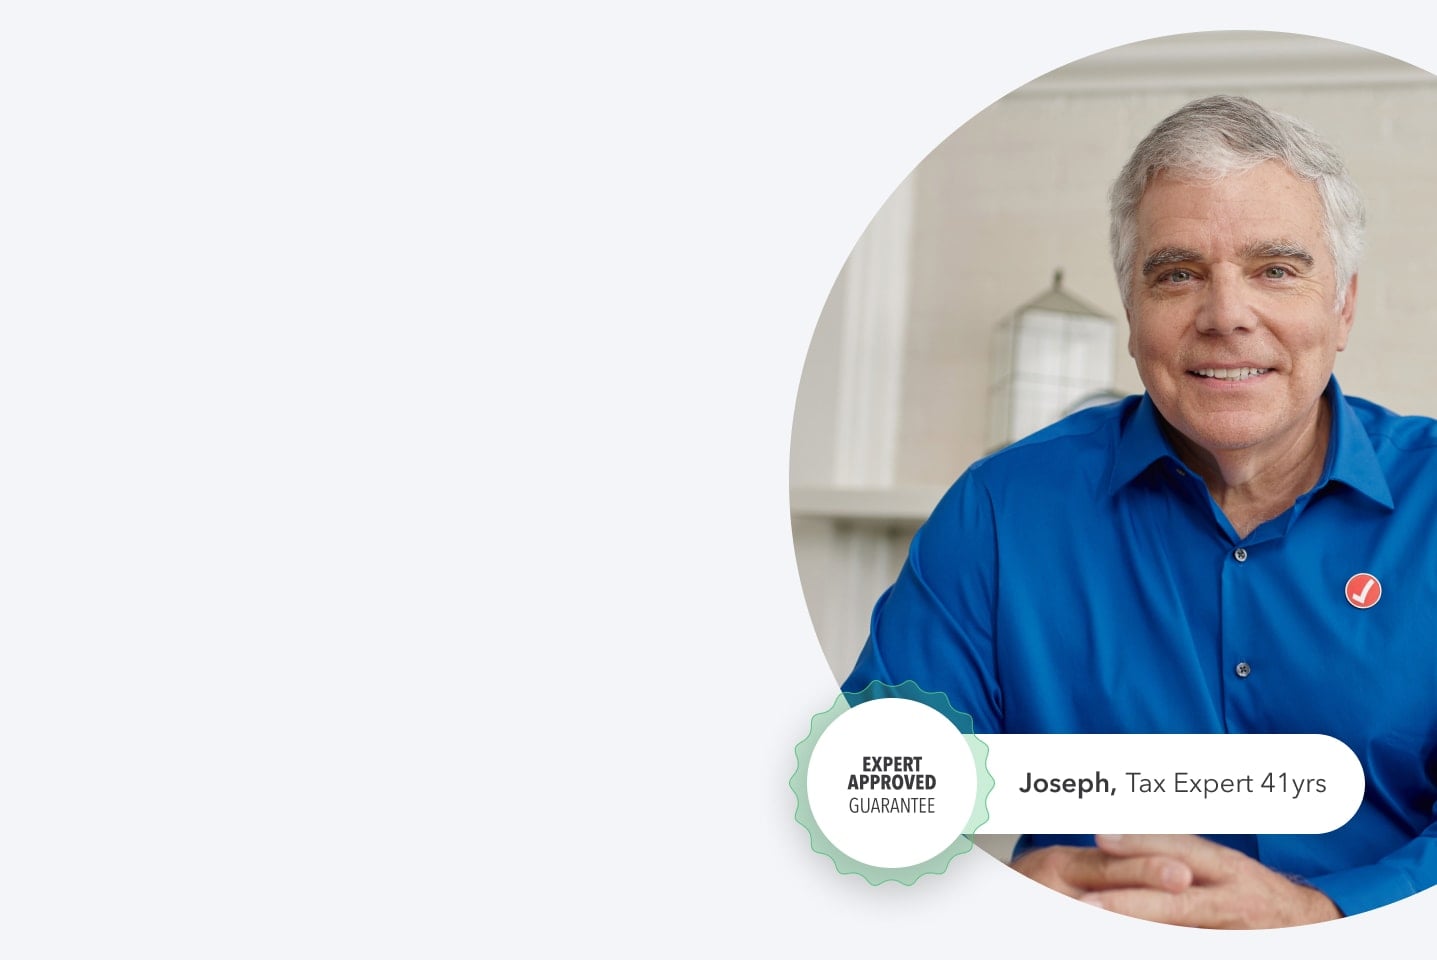 Tax expert Joseph is smiling and ready to help. He has 41 years of experience.